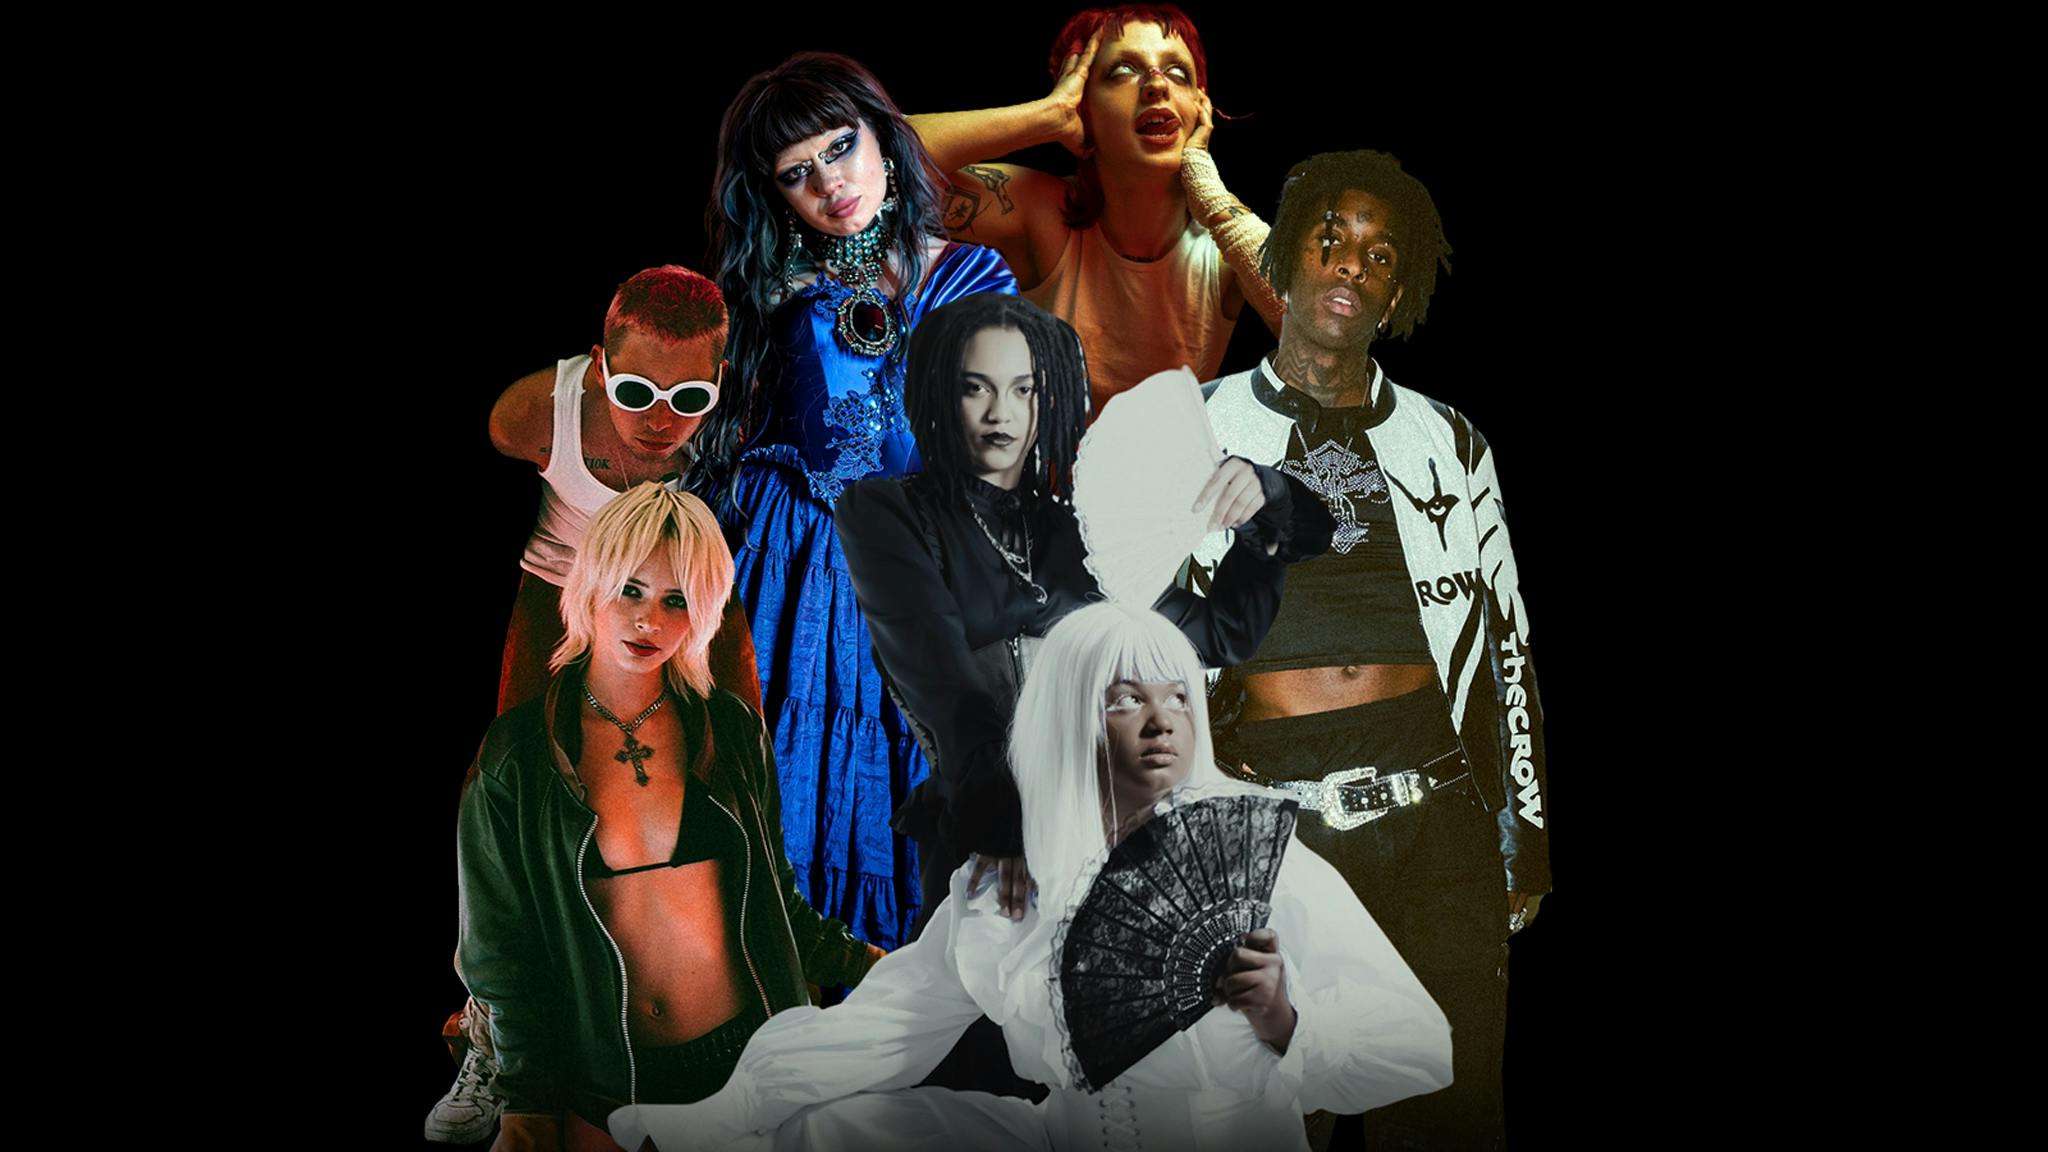 Jazmin Bean, WARGASM, Deijuvhs and more to appear at Spotify’s returning misfits 2.0 Anti-Prom